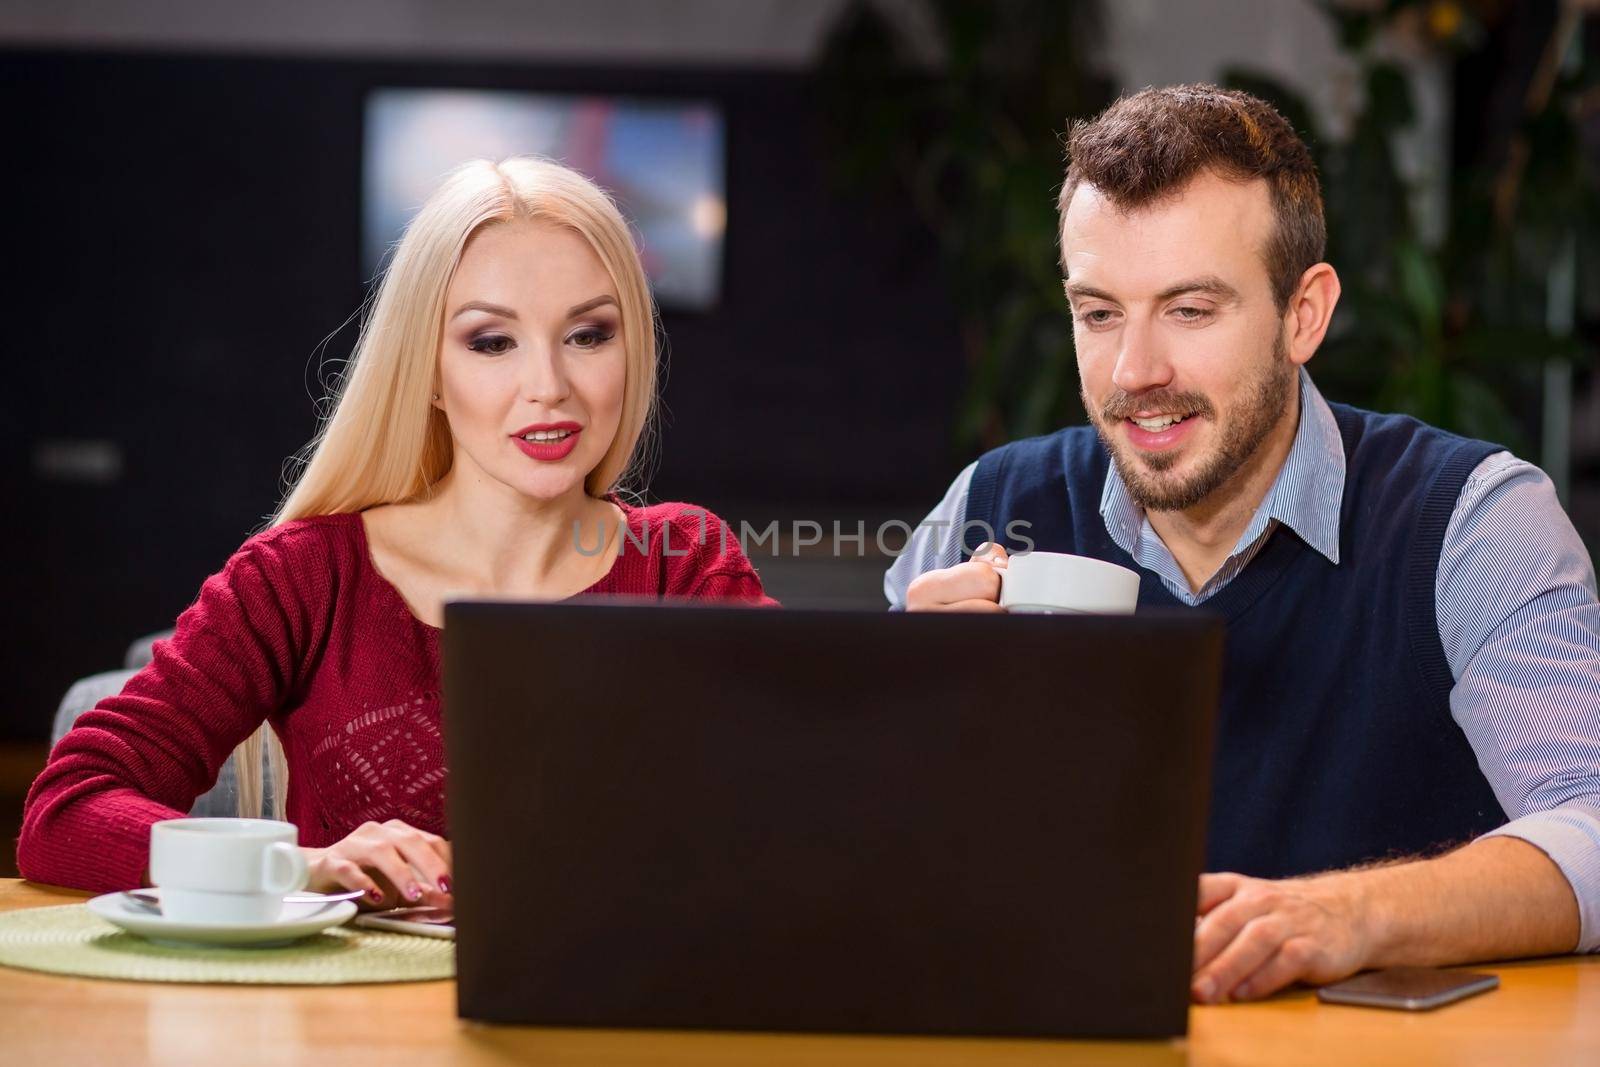 A woman and a man on a business lunch in a restaurant. discuss the project and look at the laptop screen